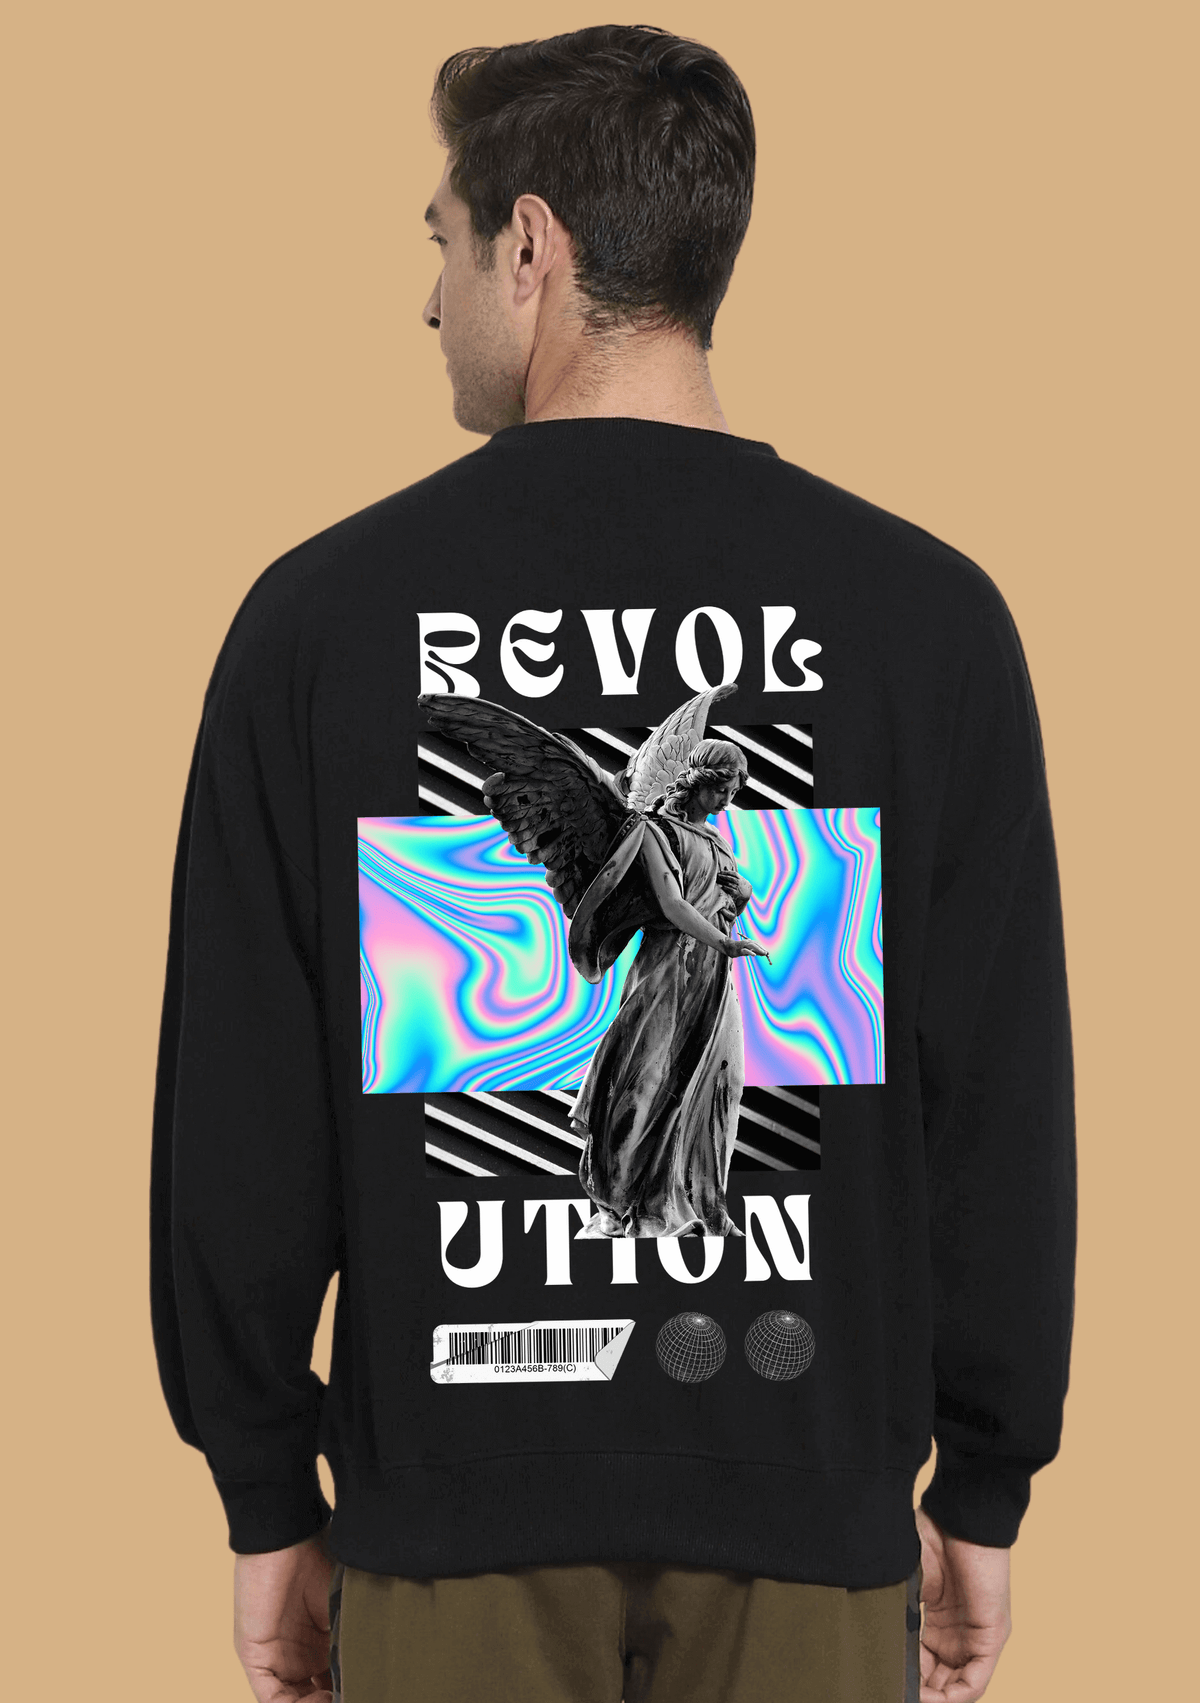 Revolution printed black color sweatshirt by offmint